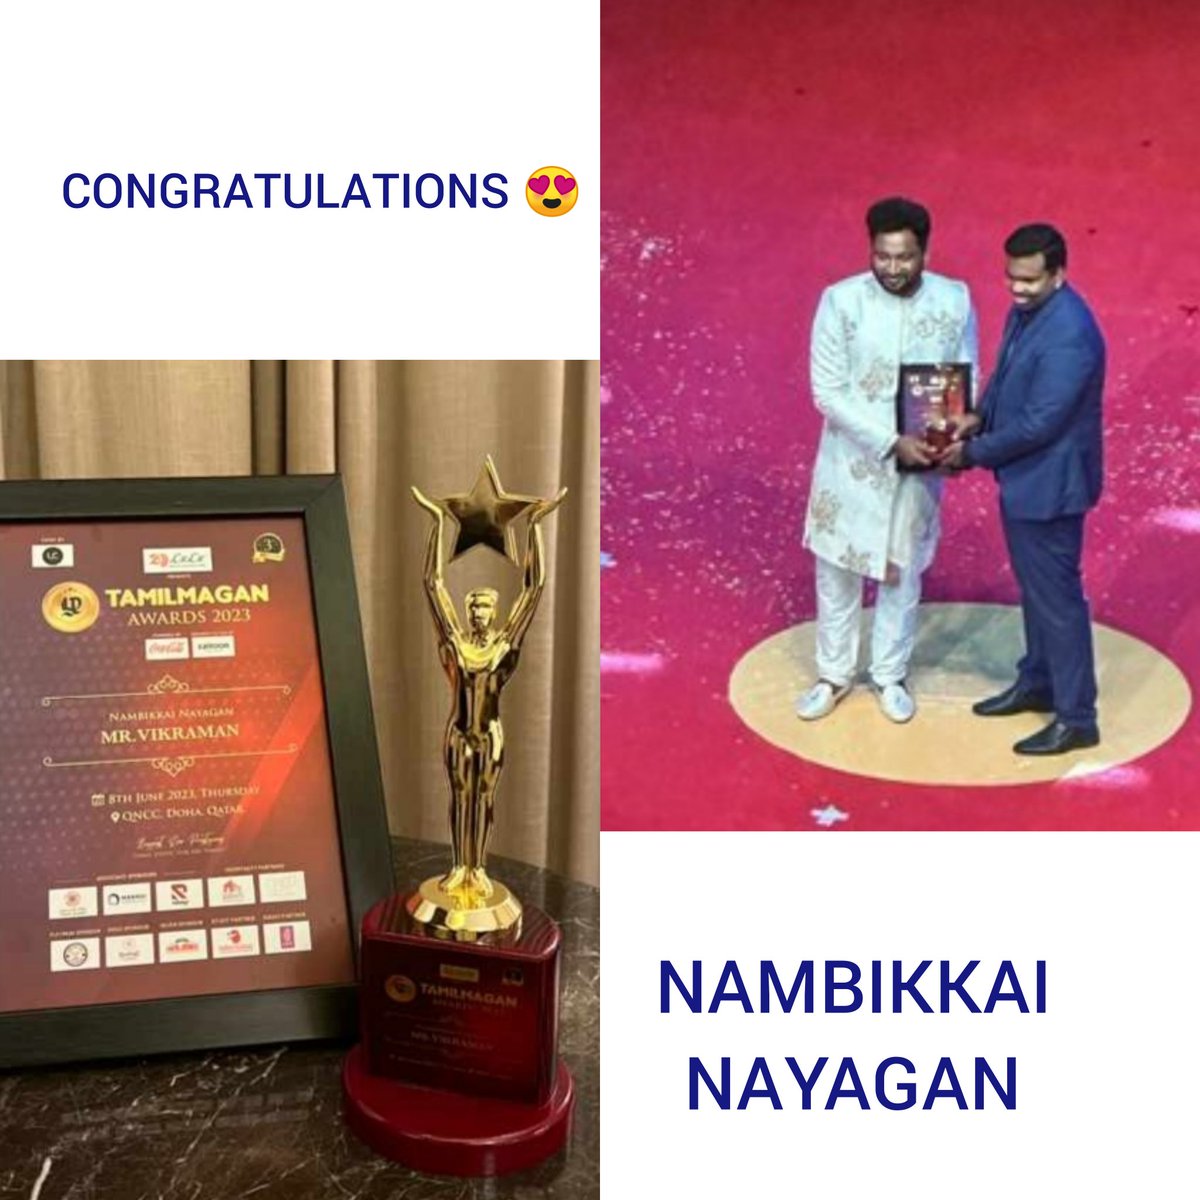 Every time obstacles push you into the dark you come back more brighter.
@RVikraman  Our 𝓝𝓪𝓶𝓫𝓲𝓴𝓴𝓪𝓲 𝓝𝓪𝓪𝔂𝓪𝓰𝓪𝓷 and this is definitely an apt title to you and you deserve more.We are proud to support you.#NambikkaiNayaganVikraman

#AramVellum
 #AramVellumLegalAid